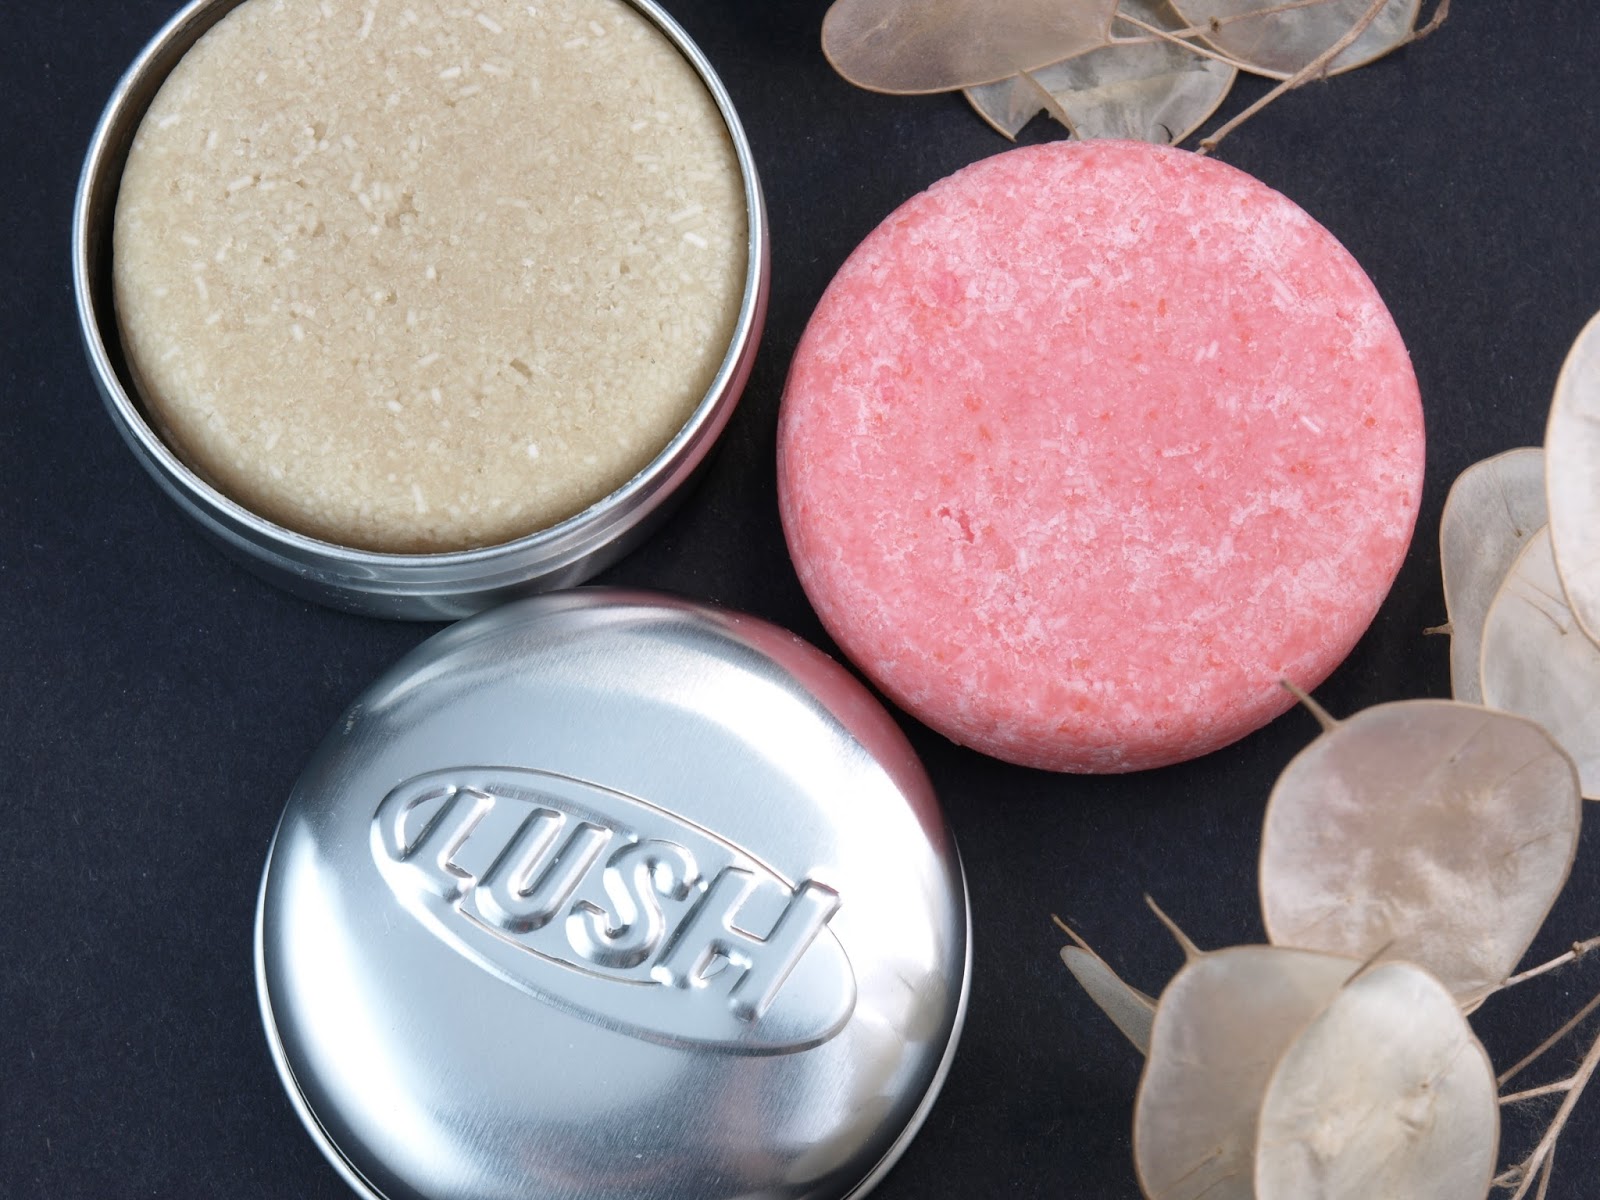 New Lush Bars in "Lullaby" & "Honey I Washed My Hair": Review | The Happy Sloths: Makeup, Skincare Blog with Reviews and Swatches